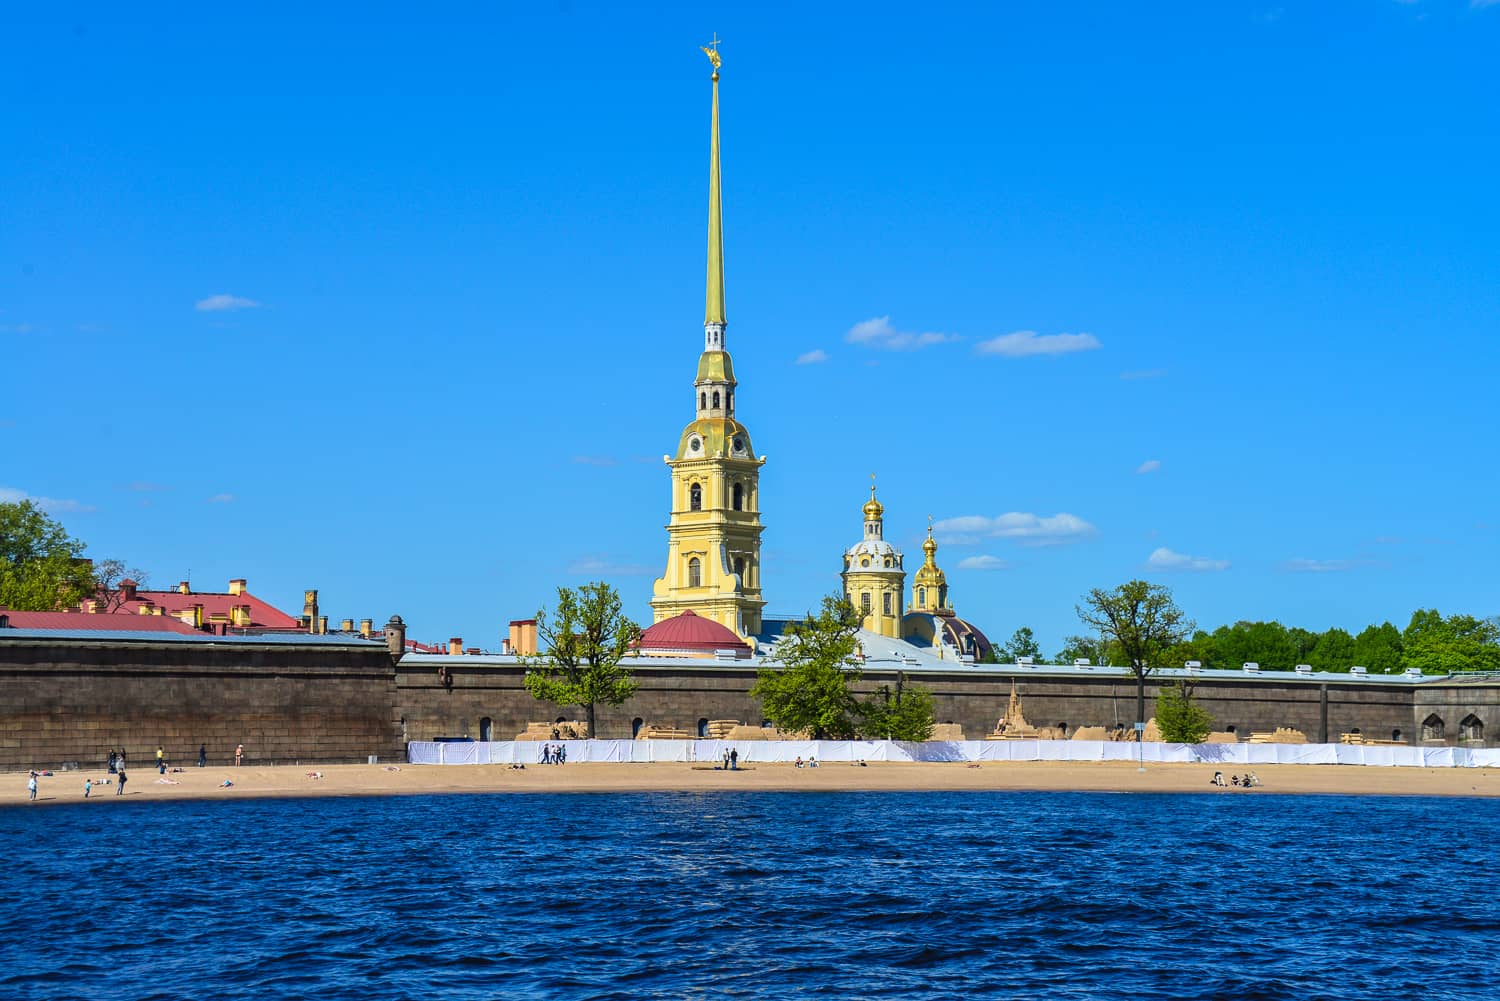 The Peter and Paul Fortress. In front are the preparations for the annual sand sculpture exhibition.